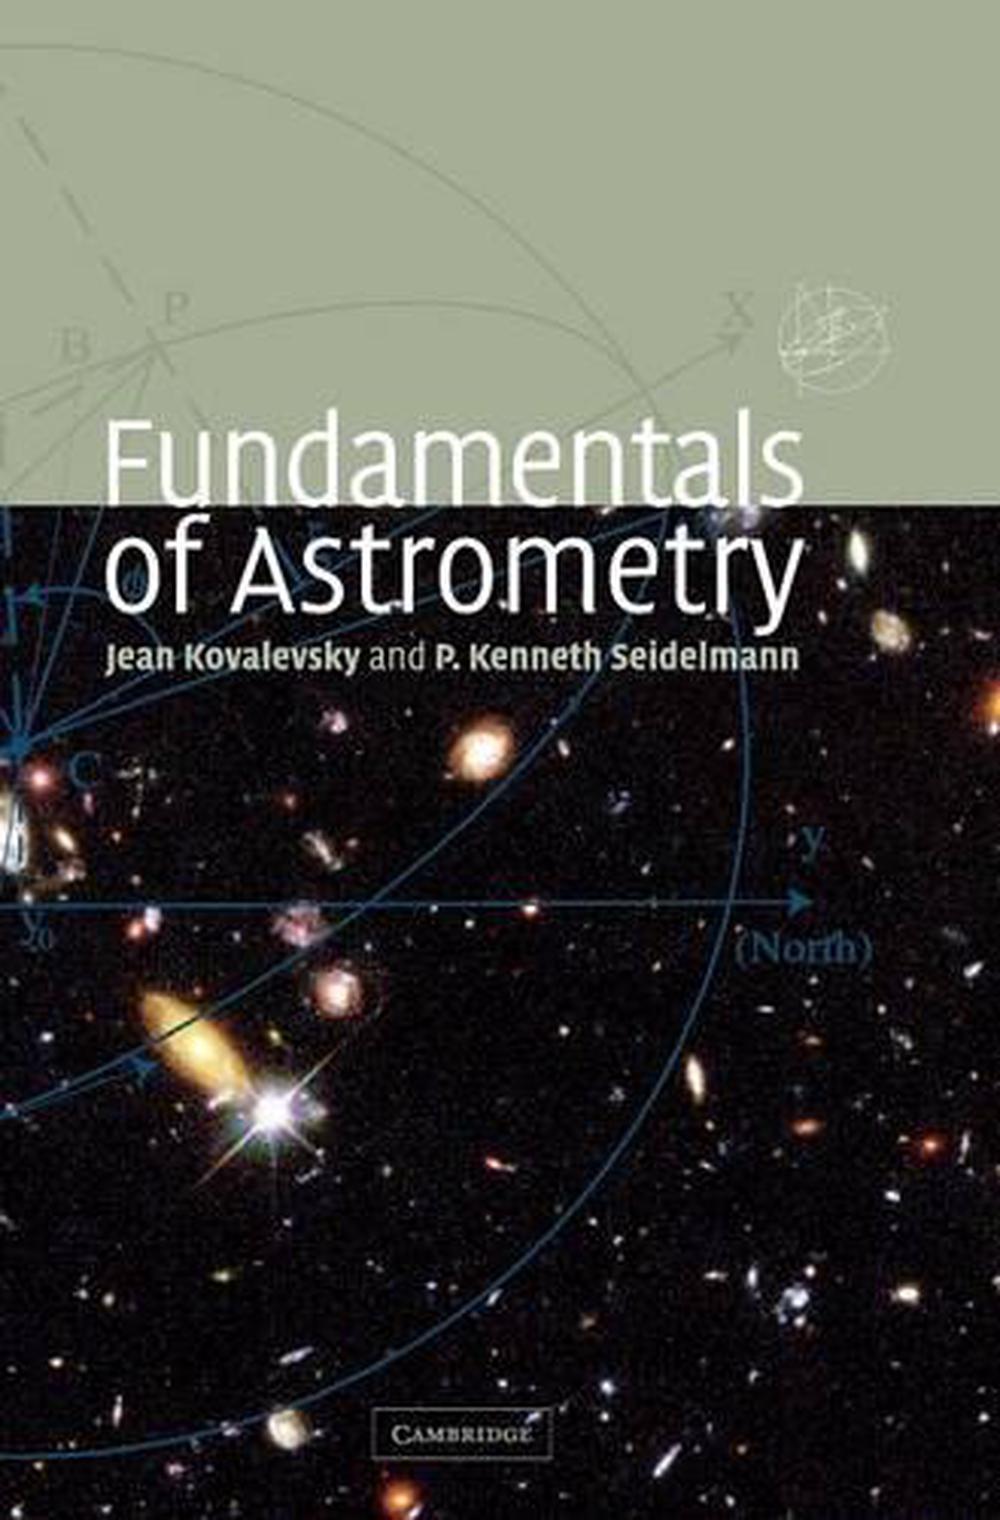 astronomical applications of astrometry pdf